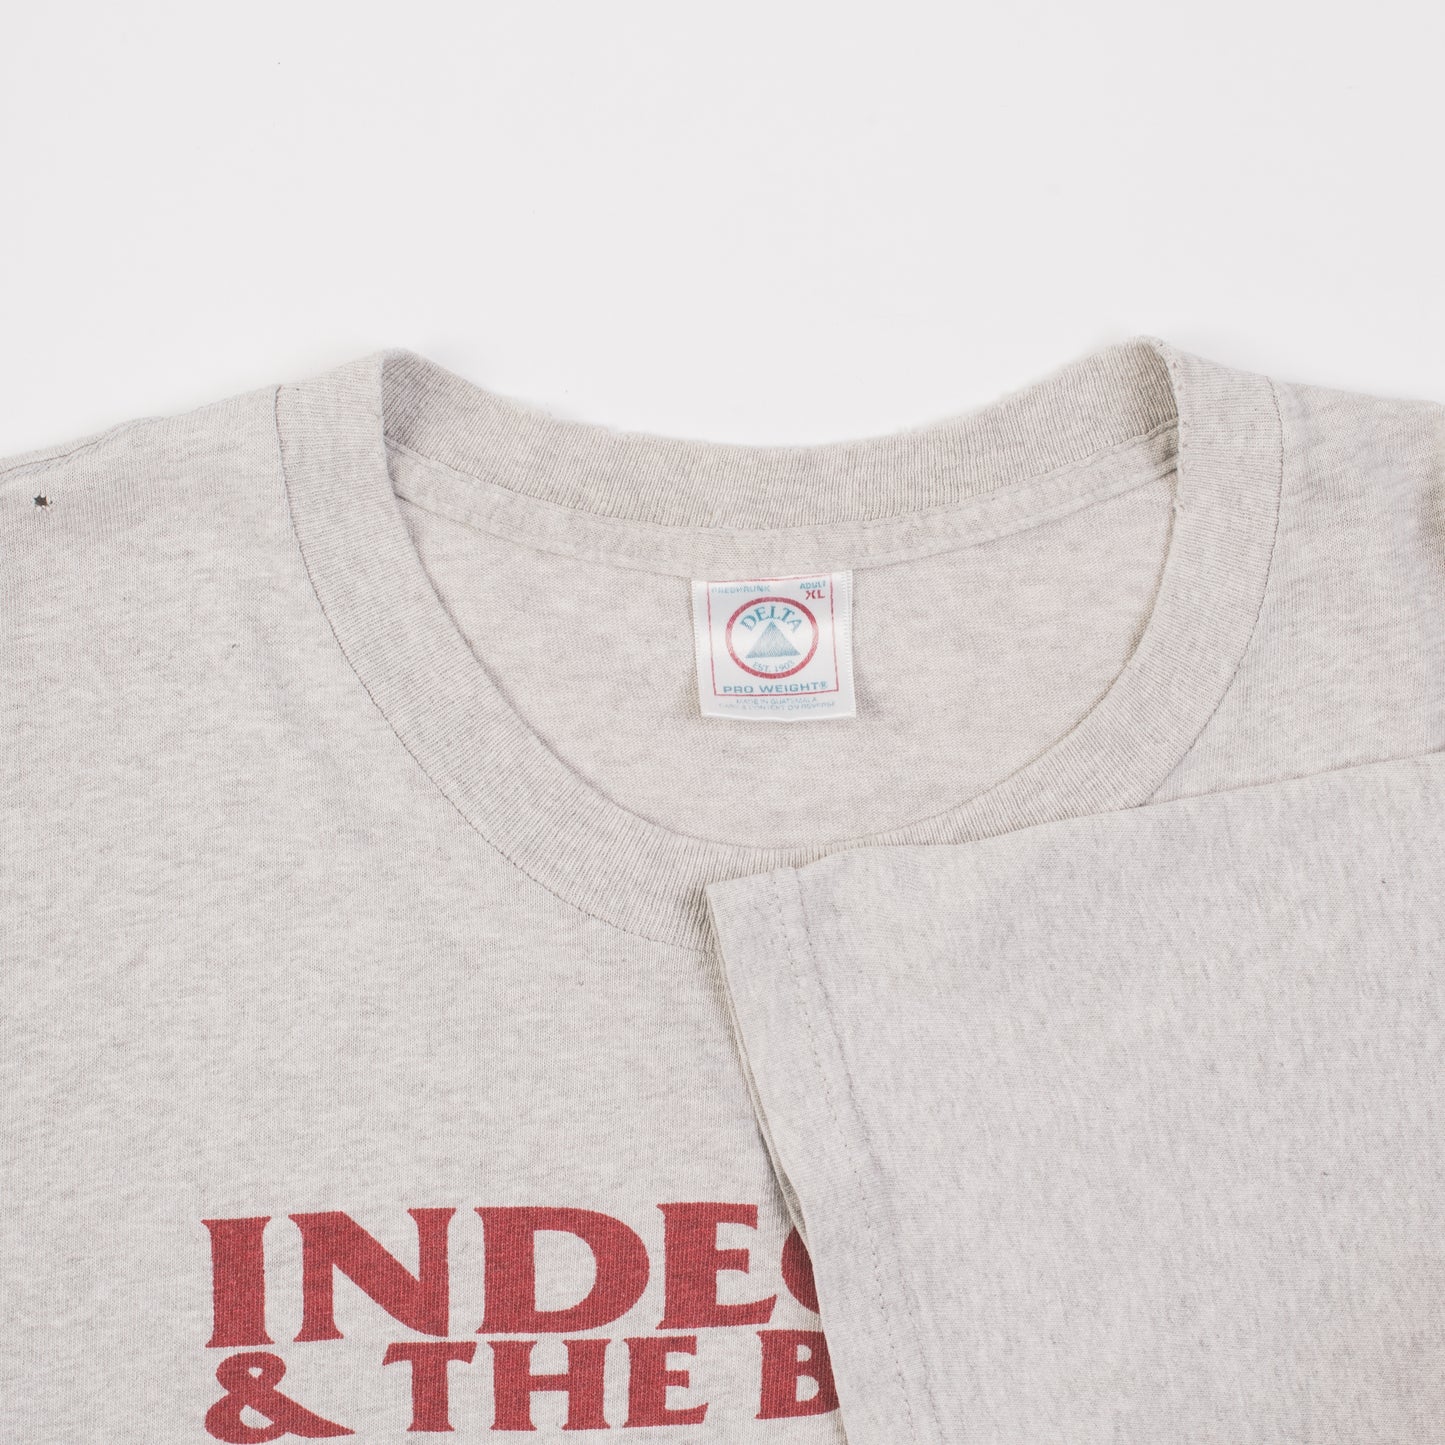 Vintage 90’s Indecision We Dare To Breath T-Shirt